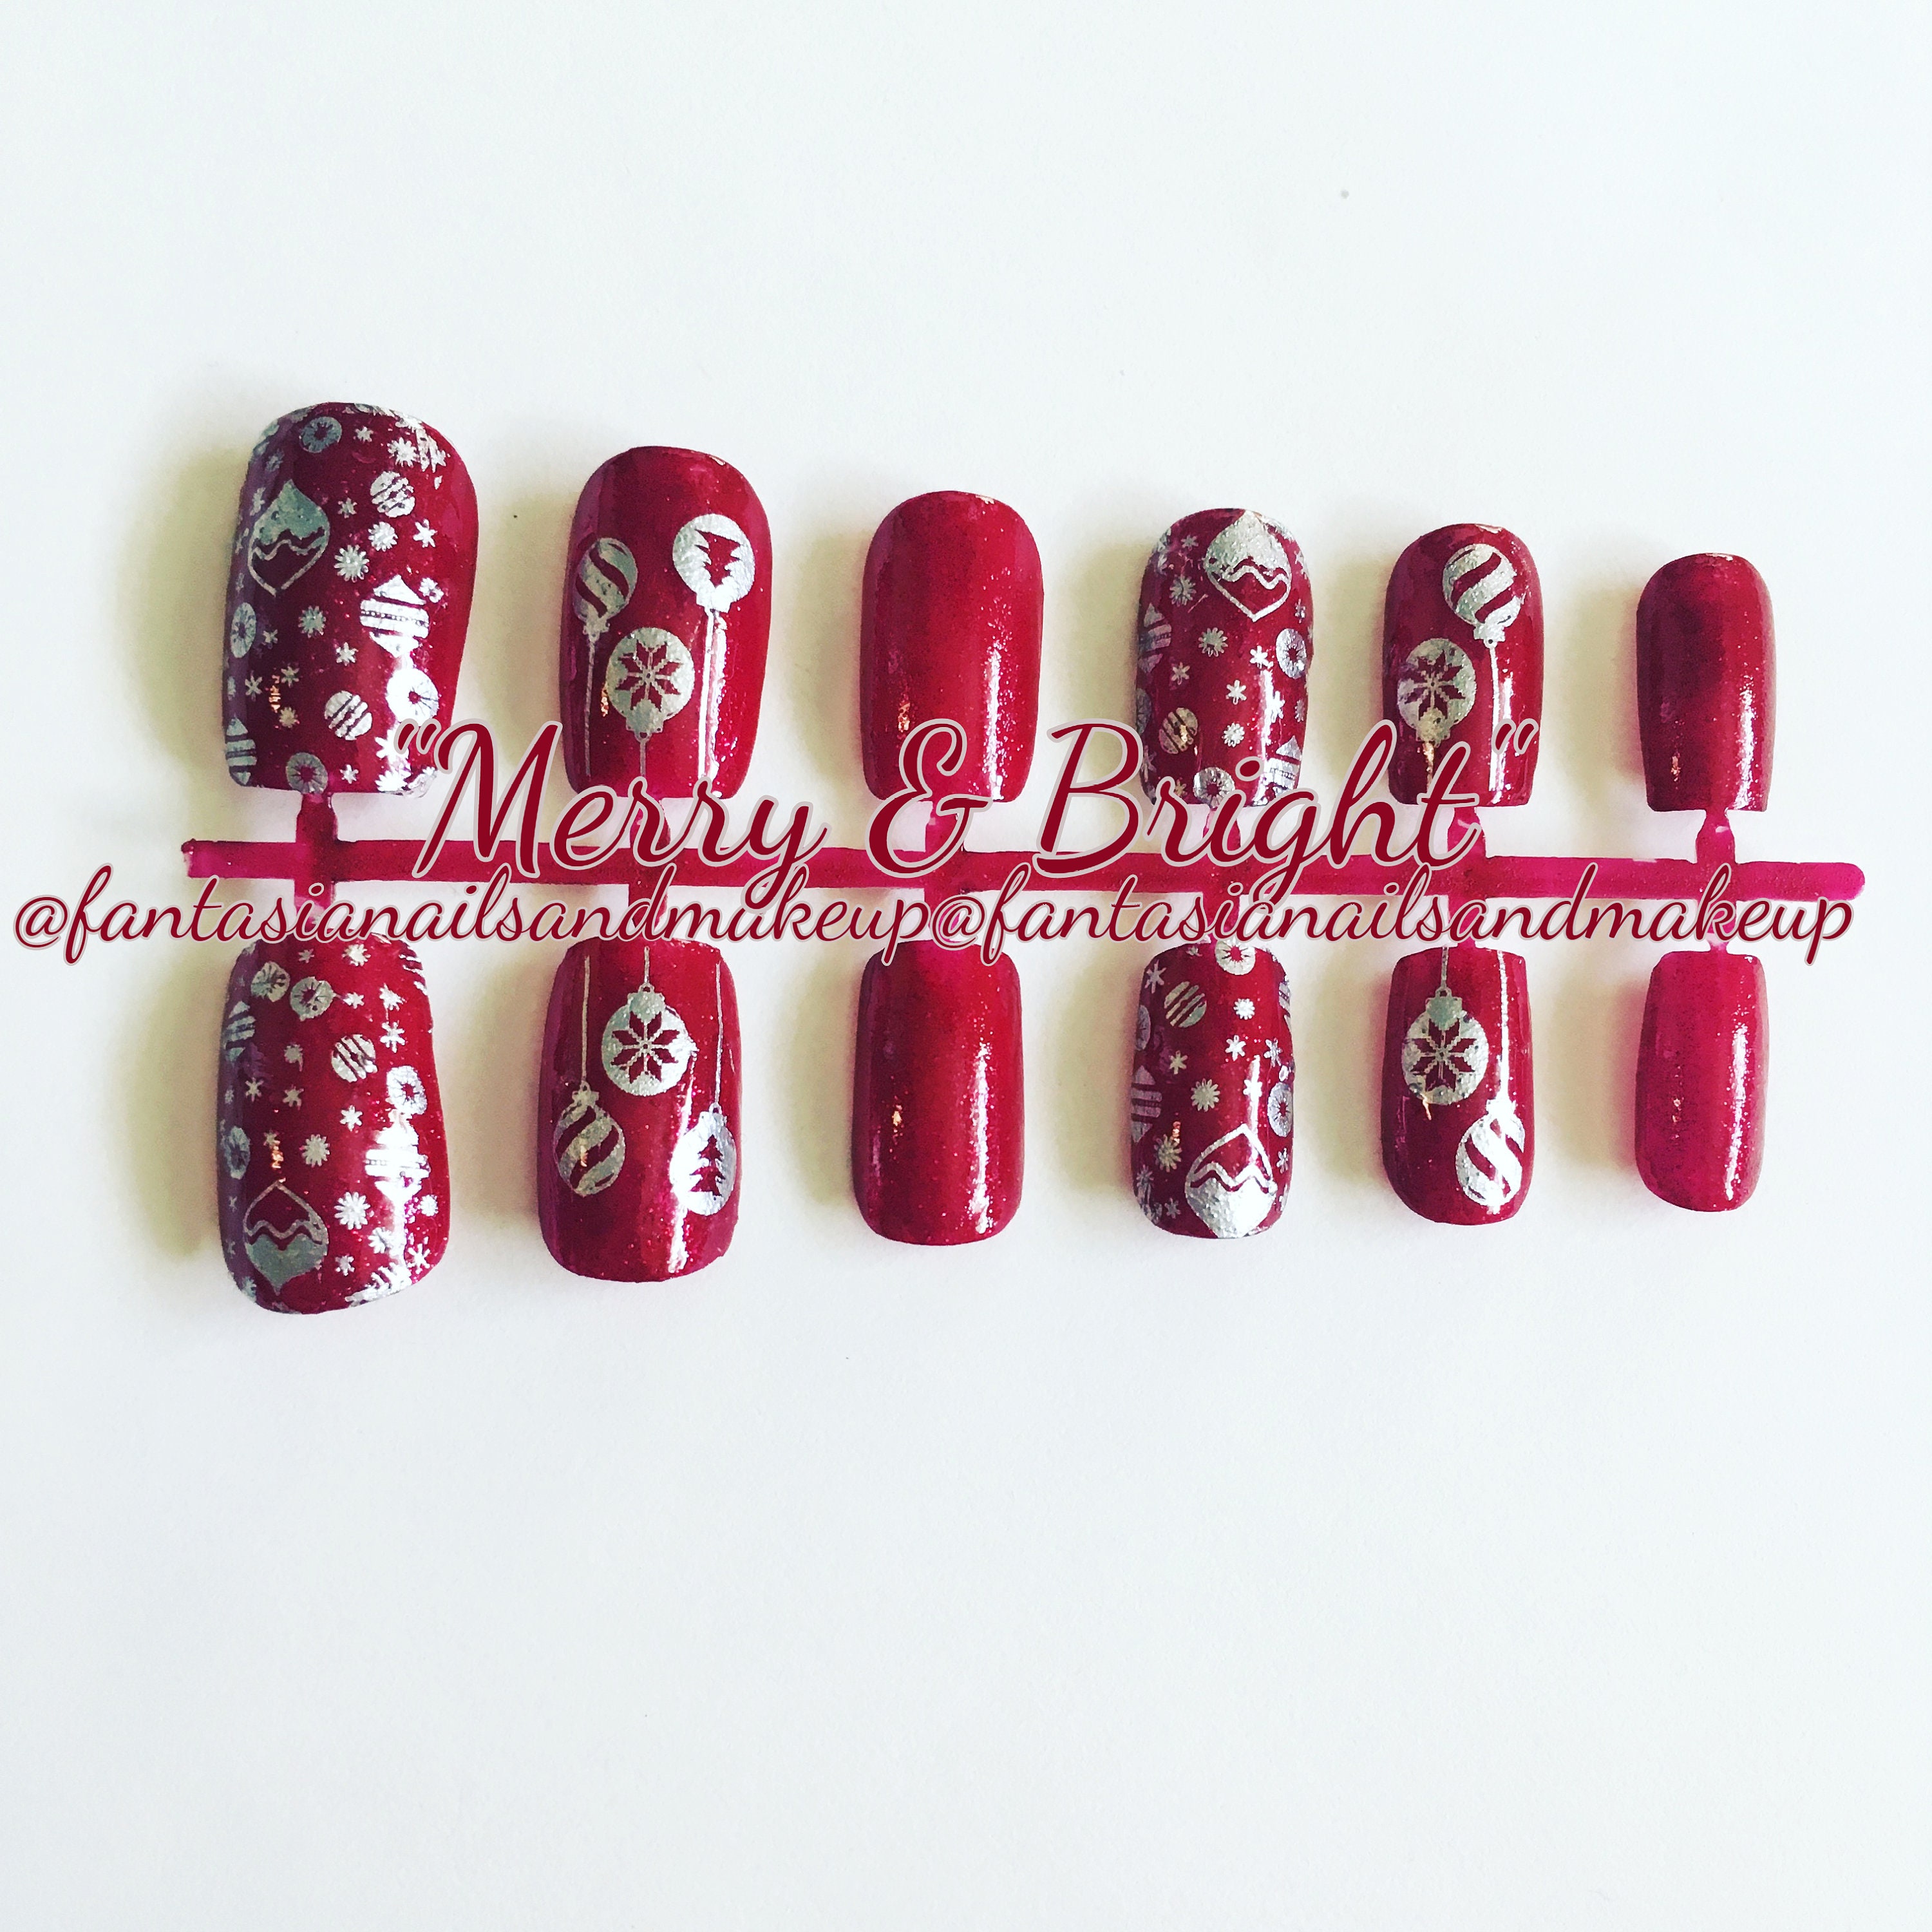 Christmas nails. Red and silver nails. With a white snow flake. | Red and silver  nails, Silver nails, Holiday nails